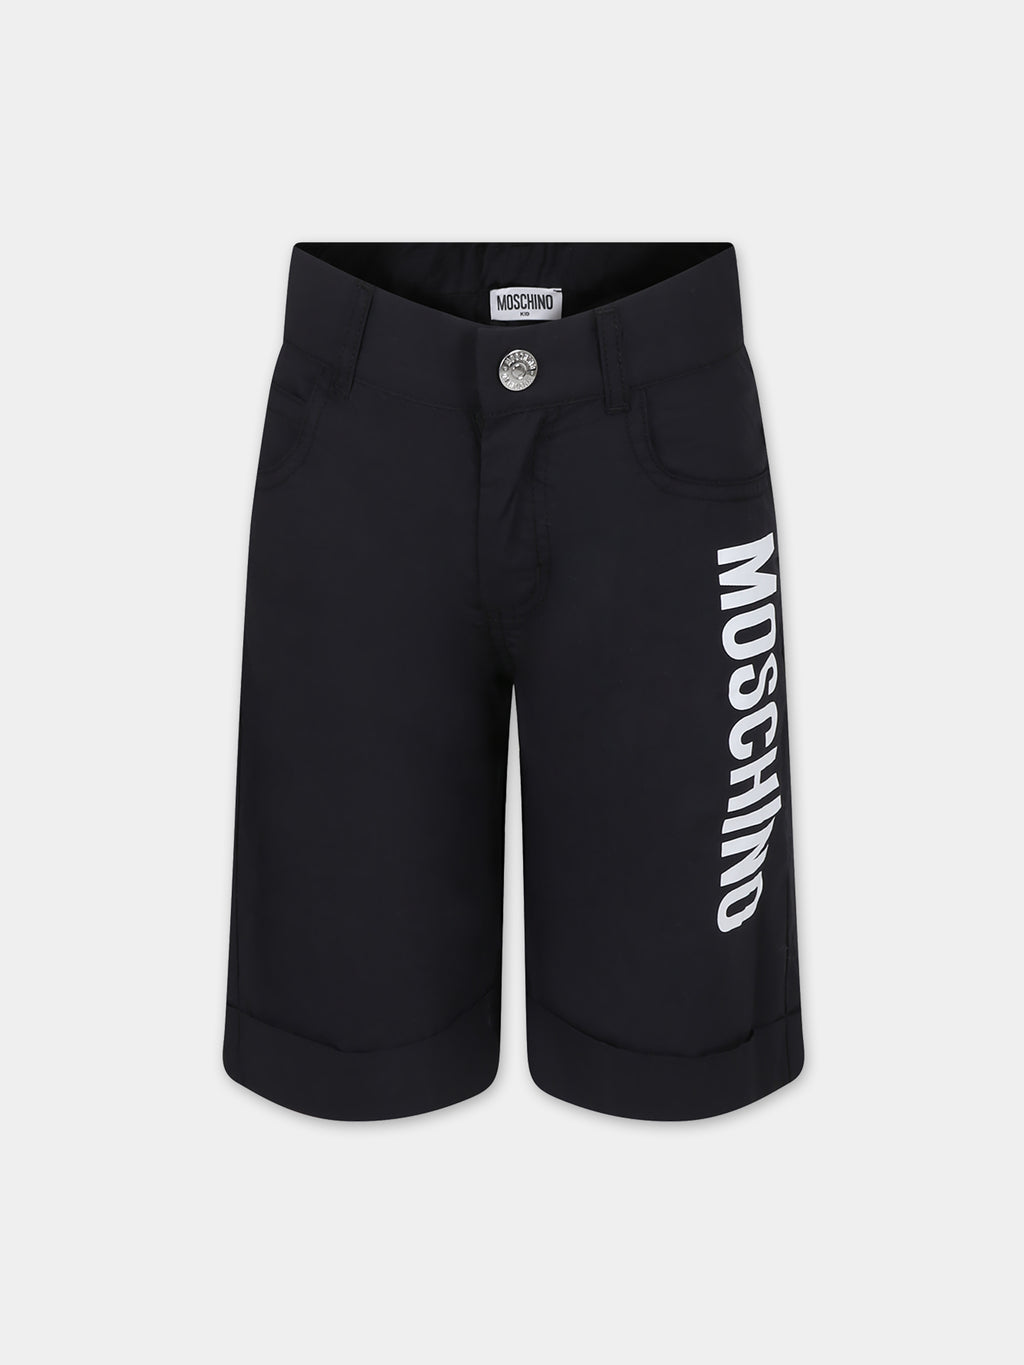 Black shorts for kids with logo